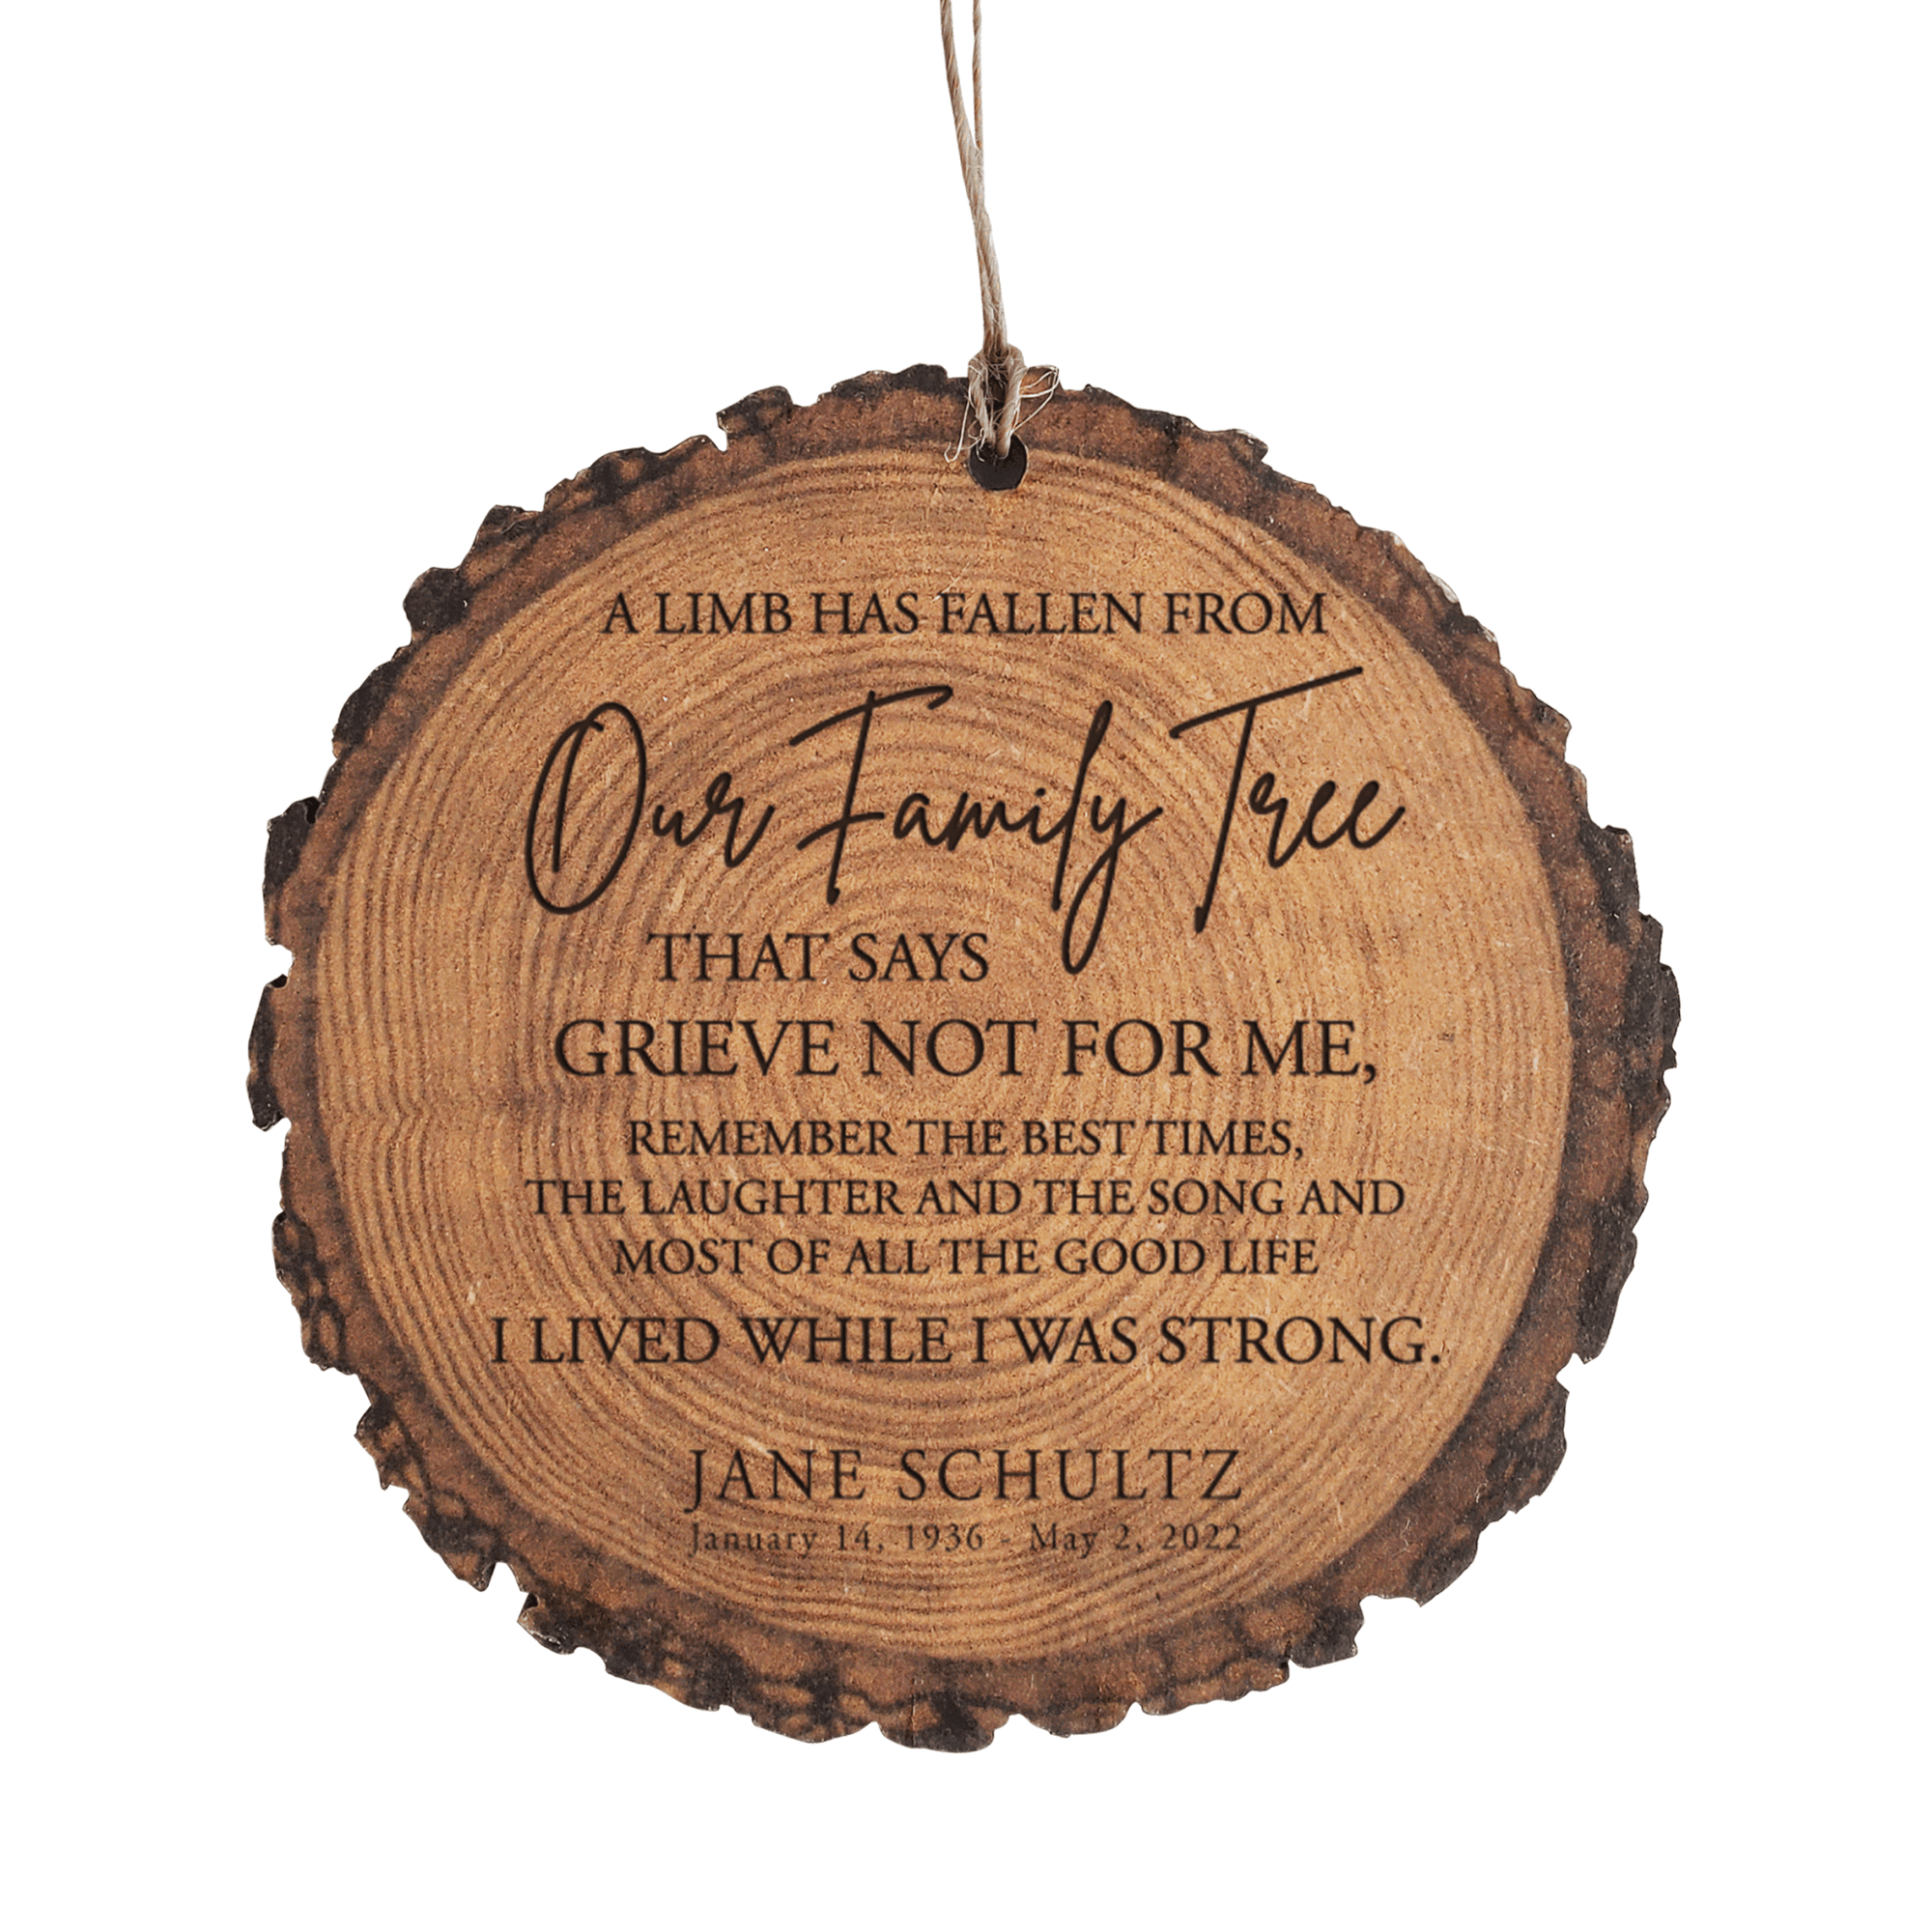 Personalized Memorial Barky Ornament For The Loss Of Loved One Sympathy Gift - A Limb Has Fallen